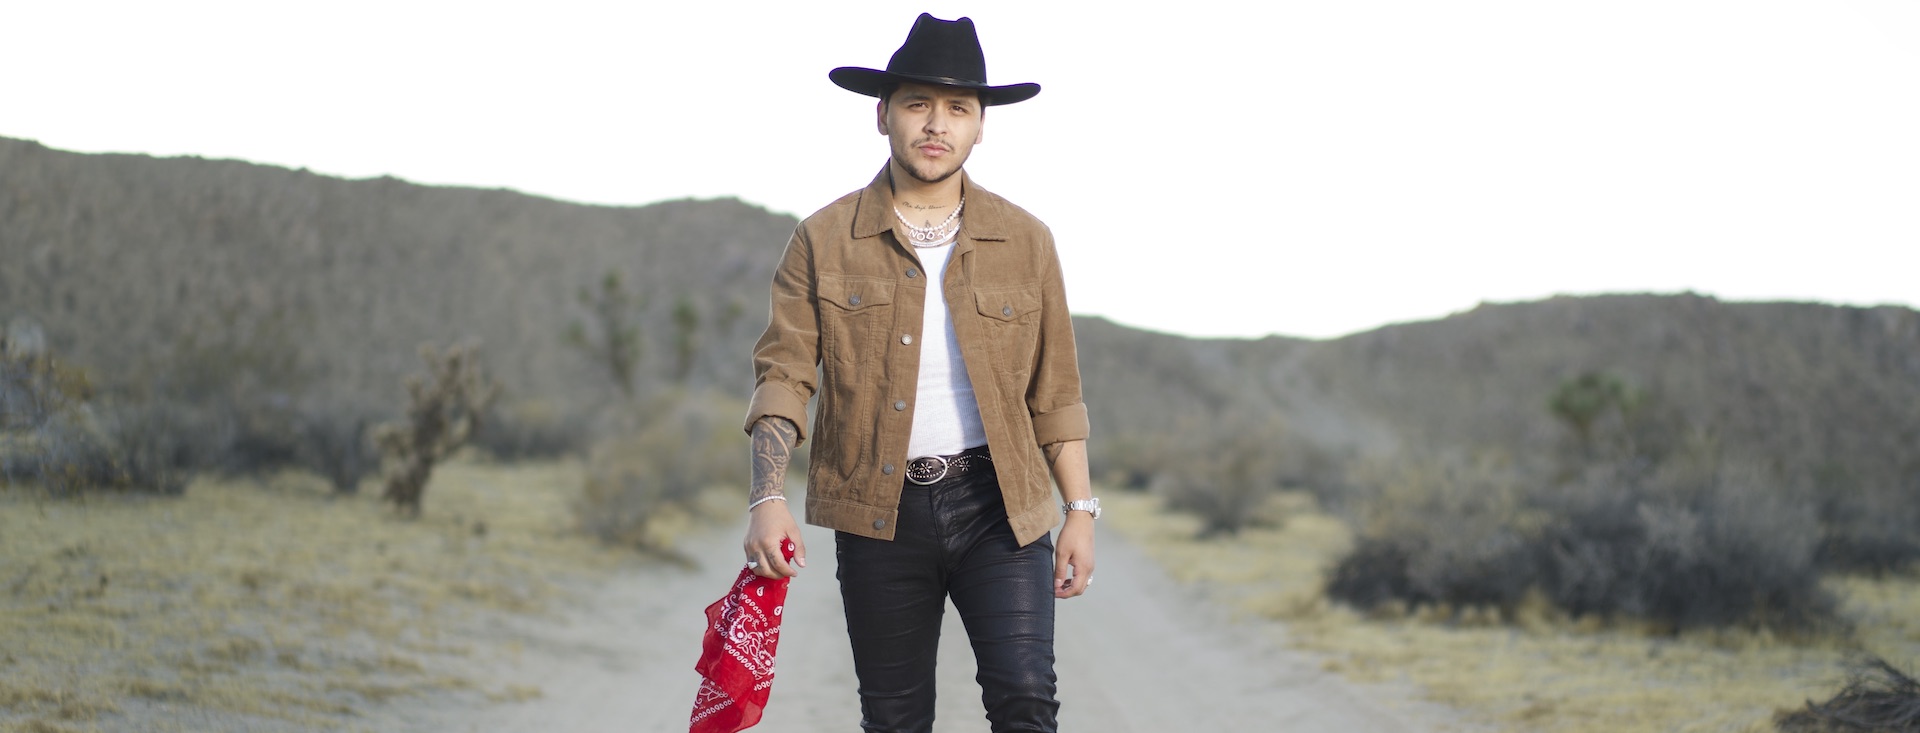 Regional Mexican Star Christian Nodal Blends His Mariacheño Style with Coun...